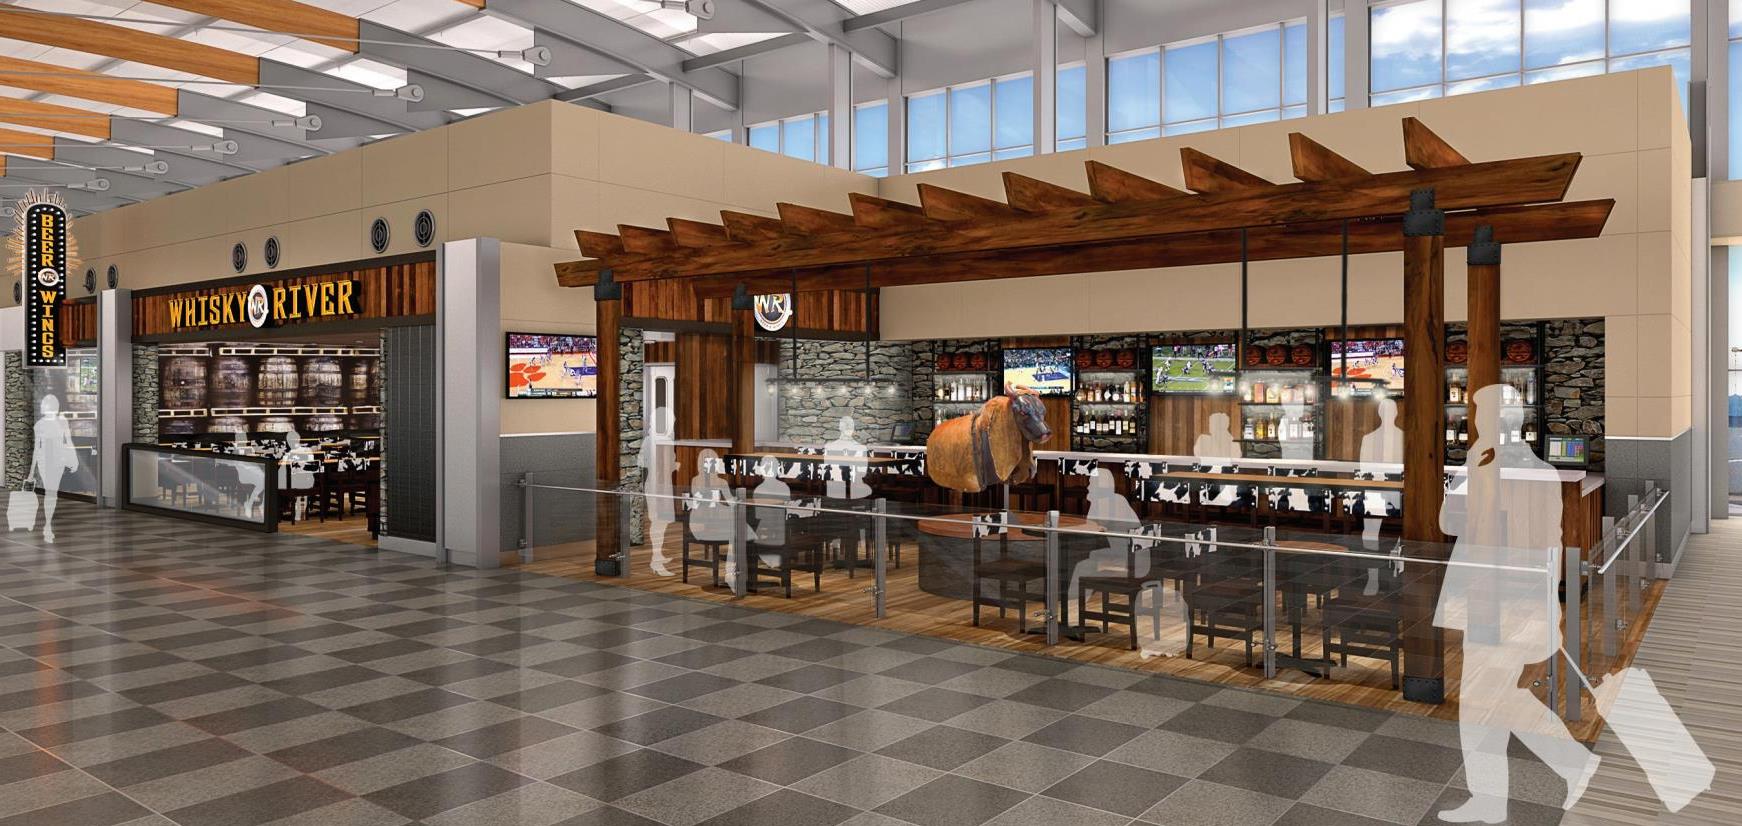 A rendering of the new Dale Jr’s Whisky River location at Raleigh-Durham International Airport.